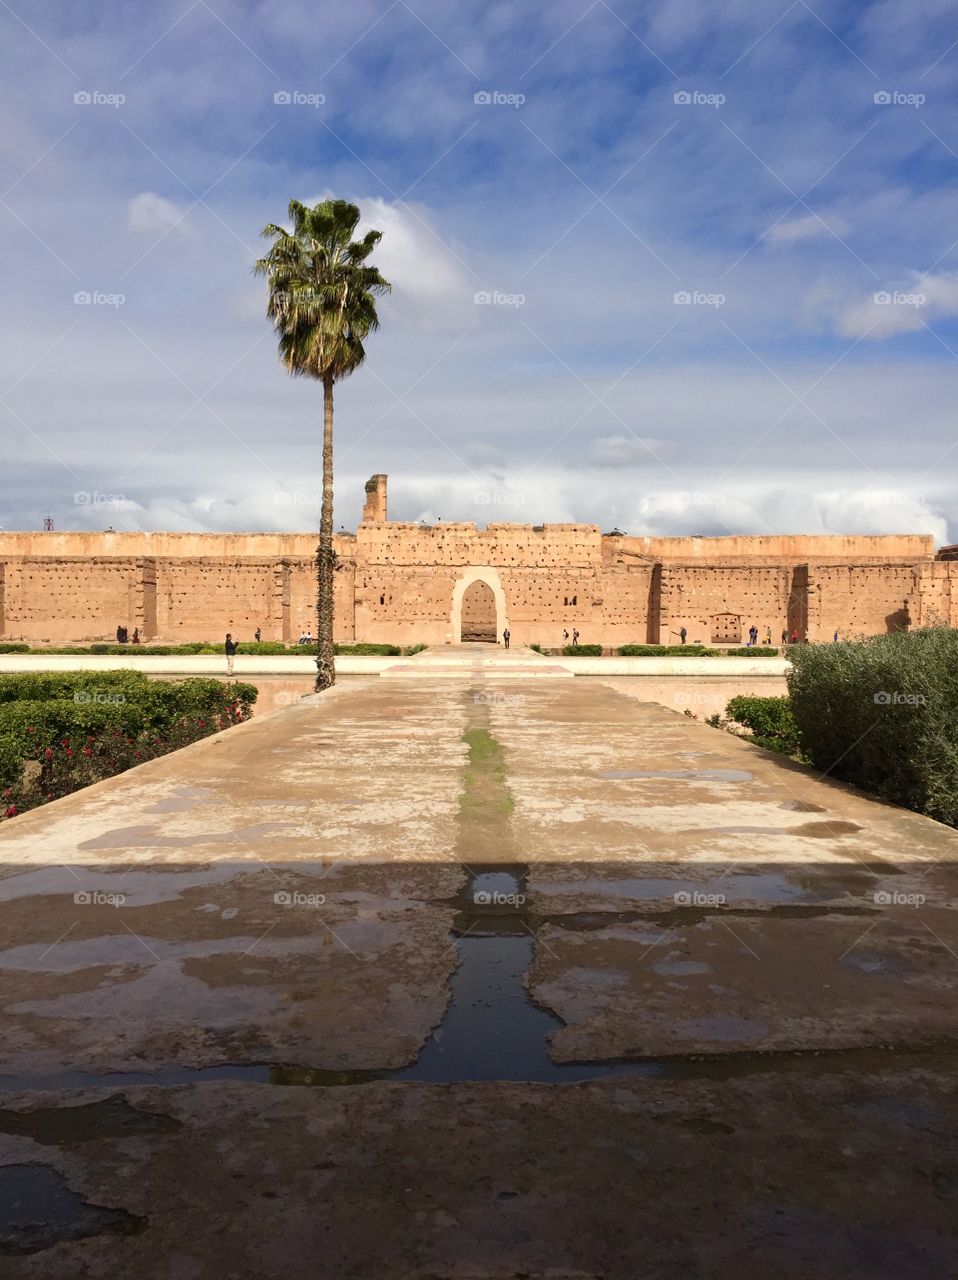 Palace in Marrakech 